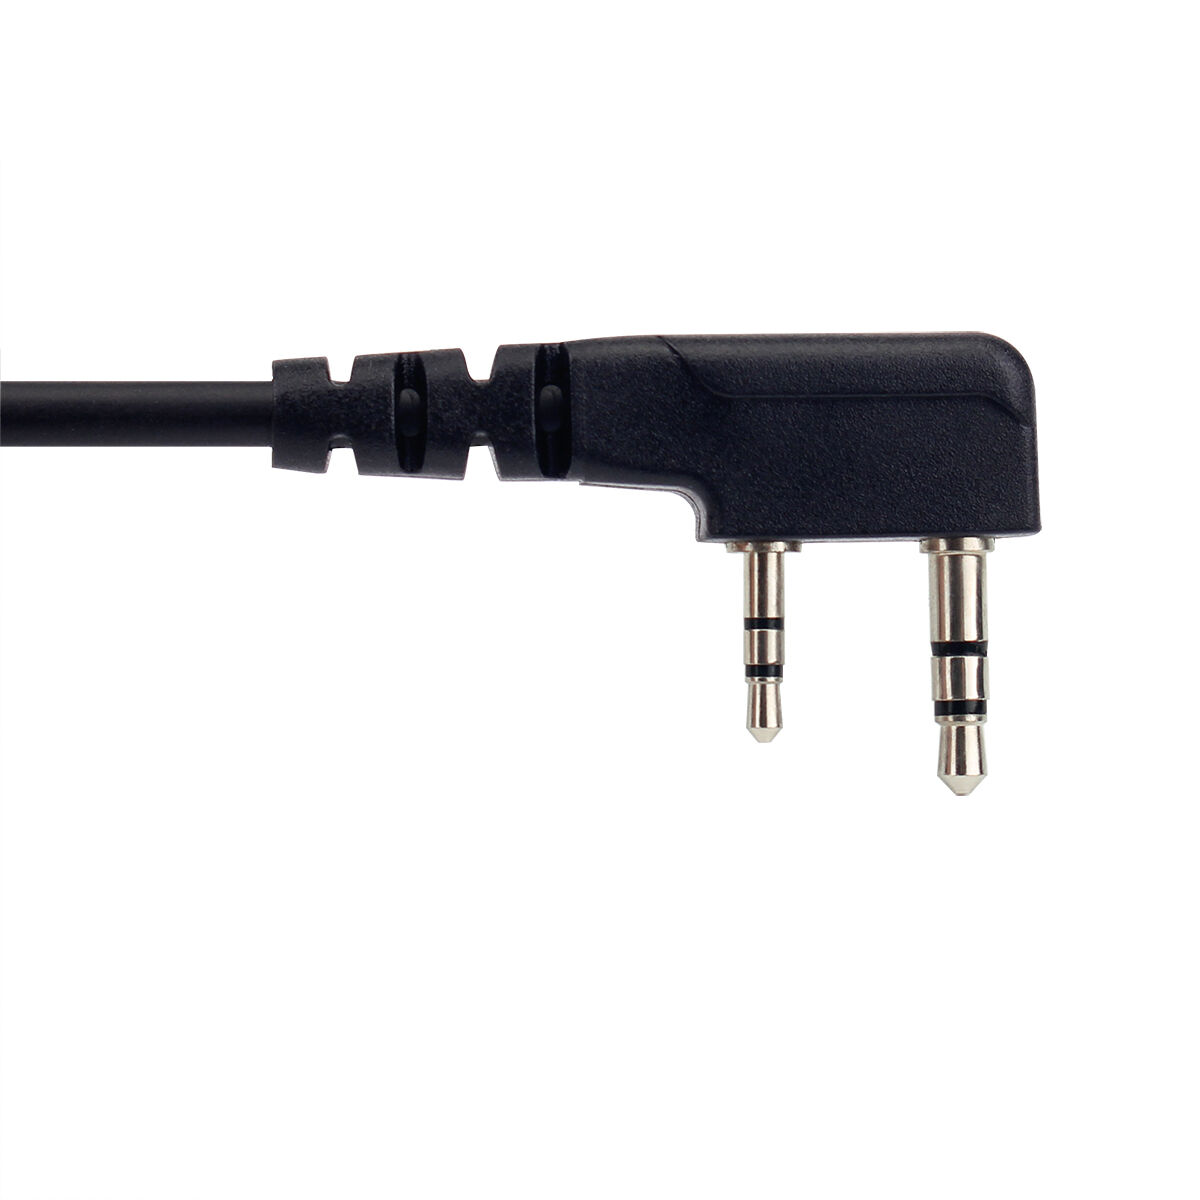 Retevis USB Programming Cable for Kenwood 2-Pin Radios